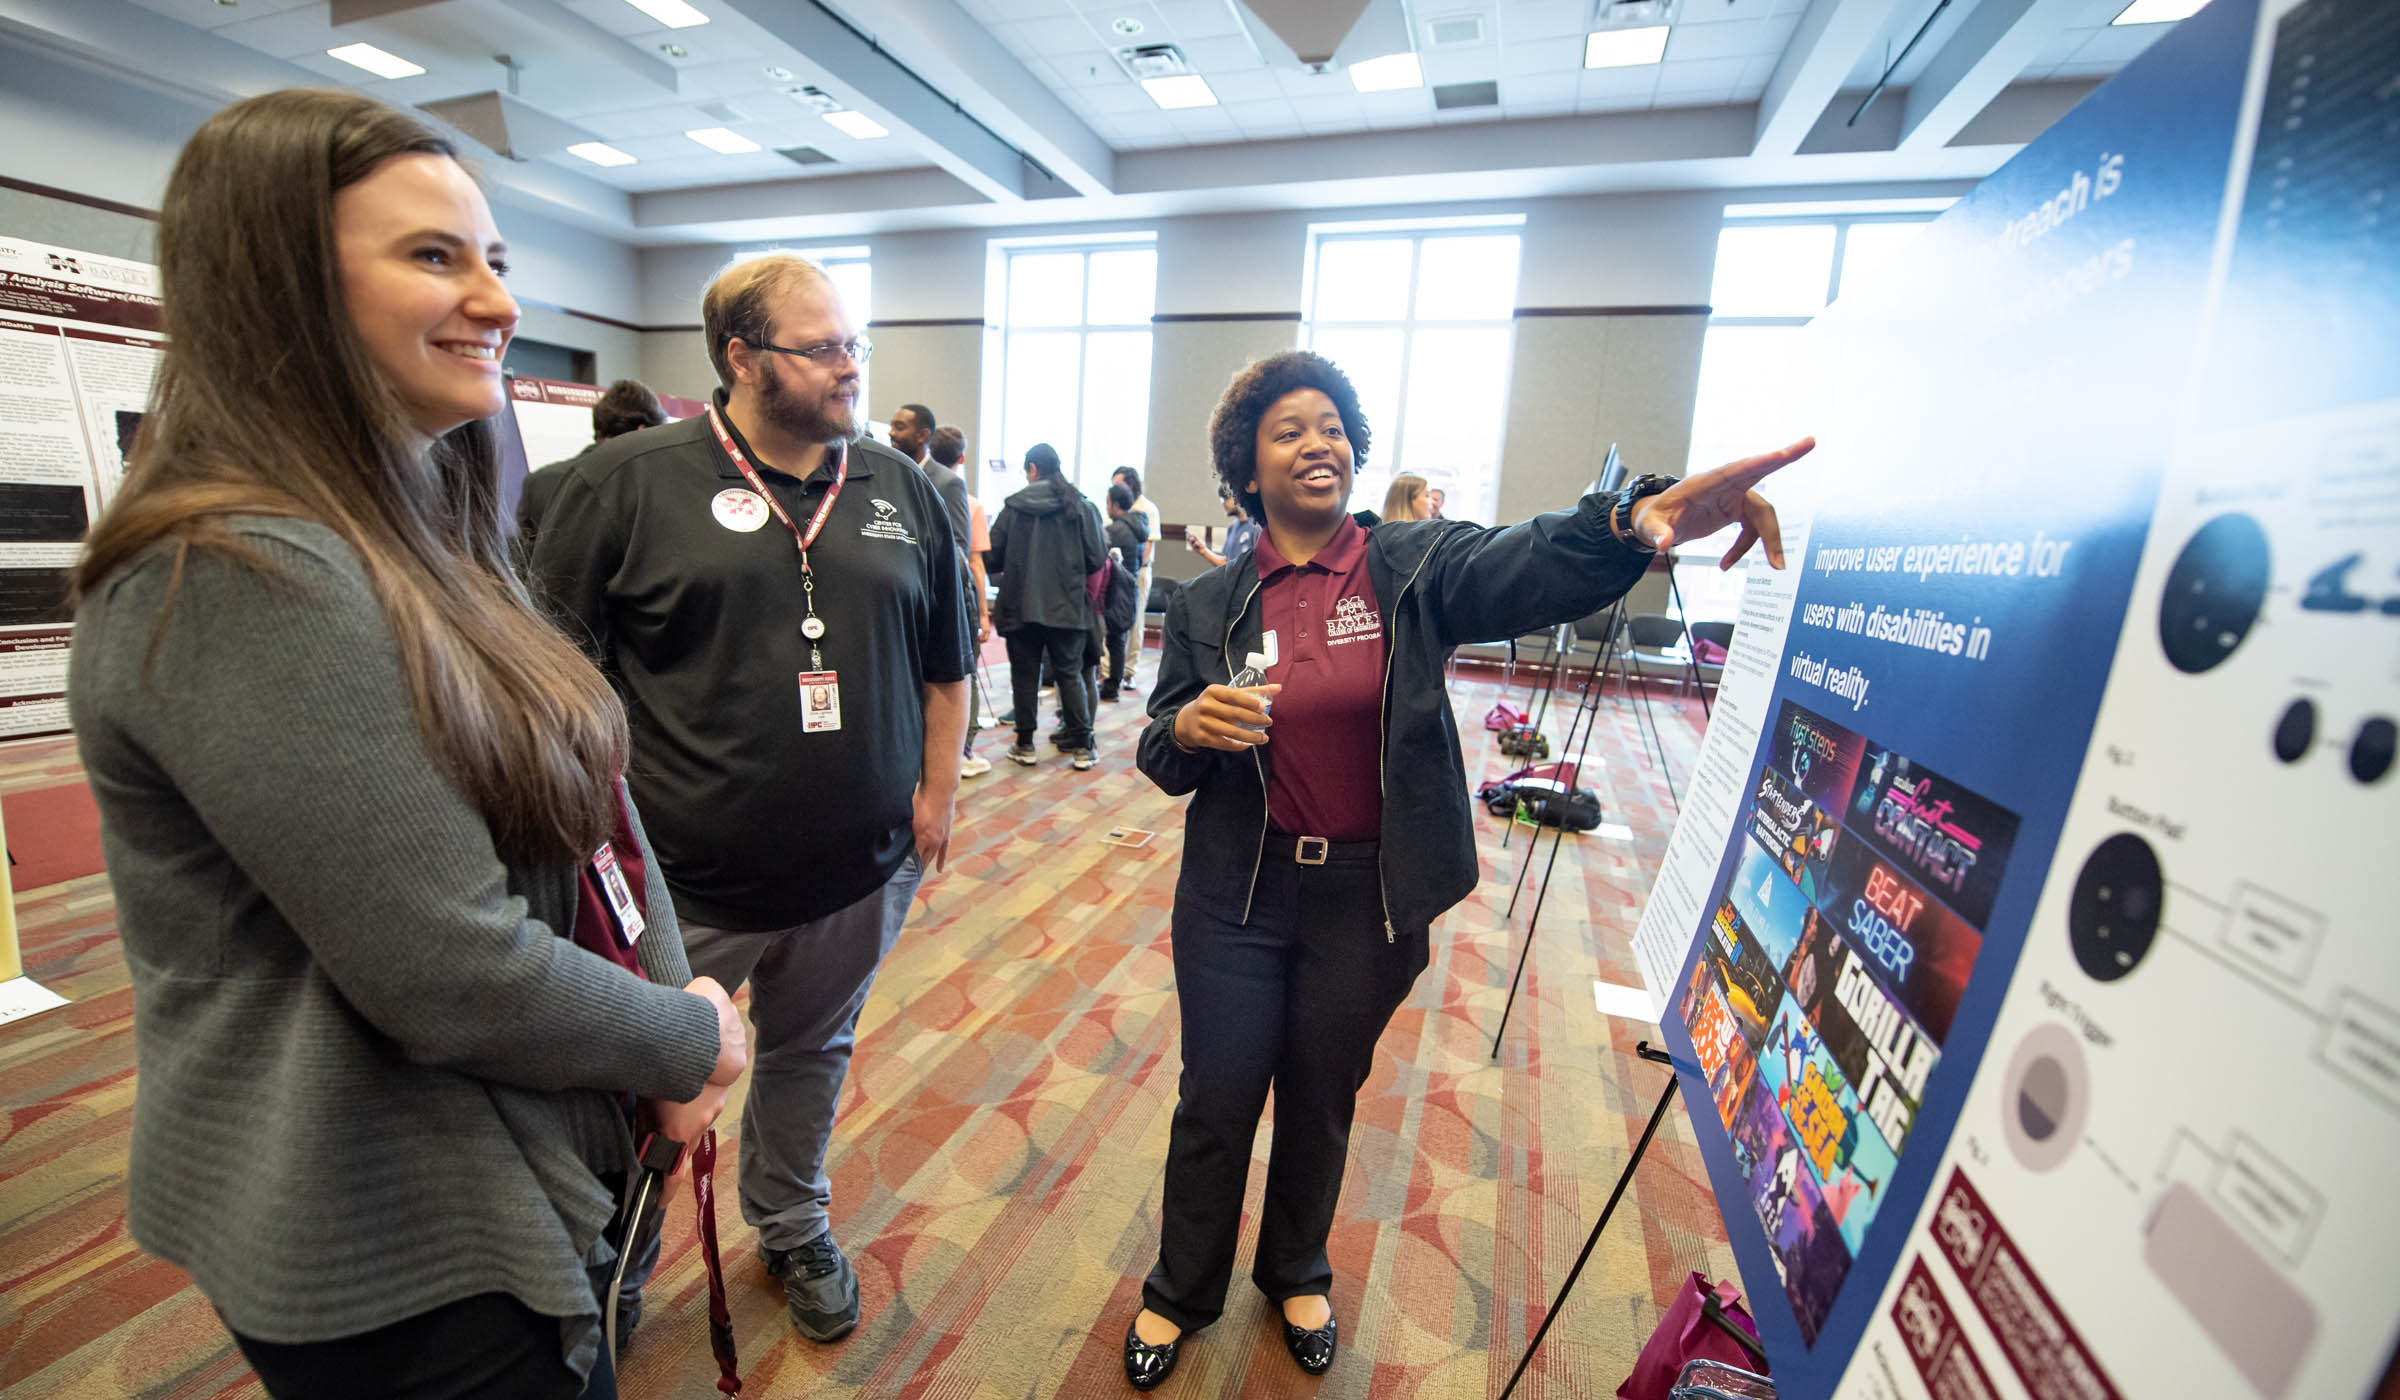 At center, a student points to her poster research, with two onlookers to her left, all backlit with the windows of the Colvard Union ballroom.